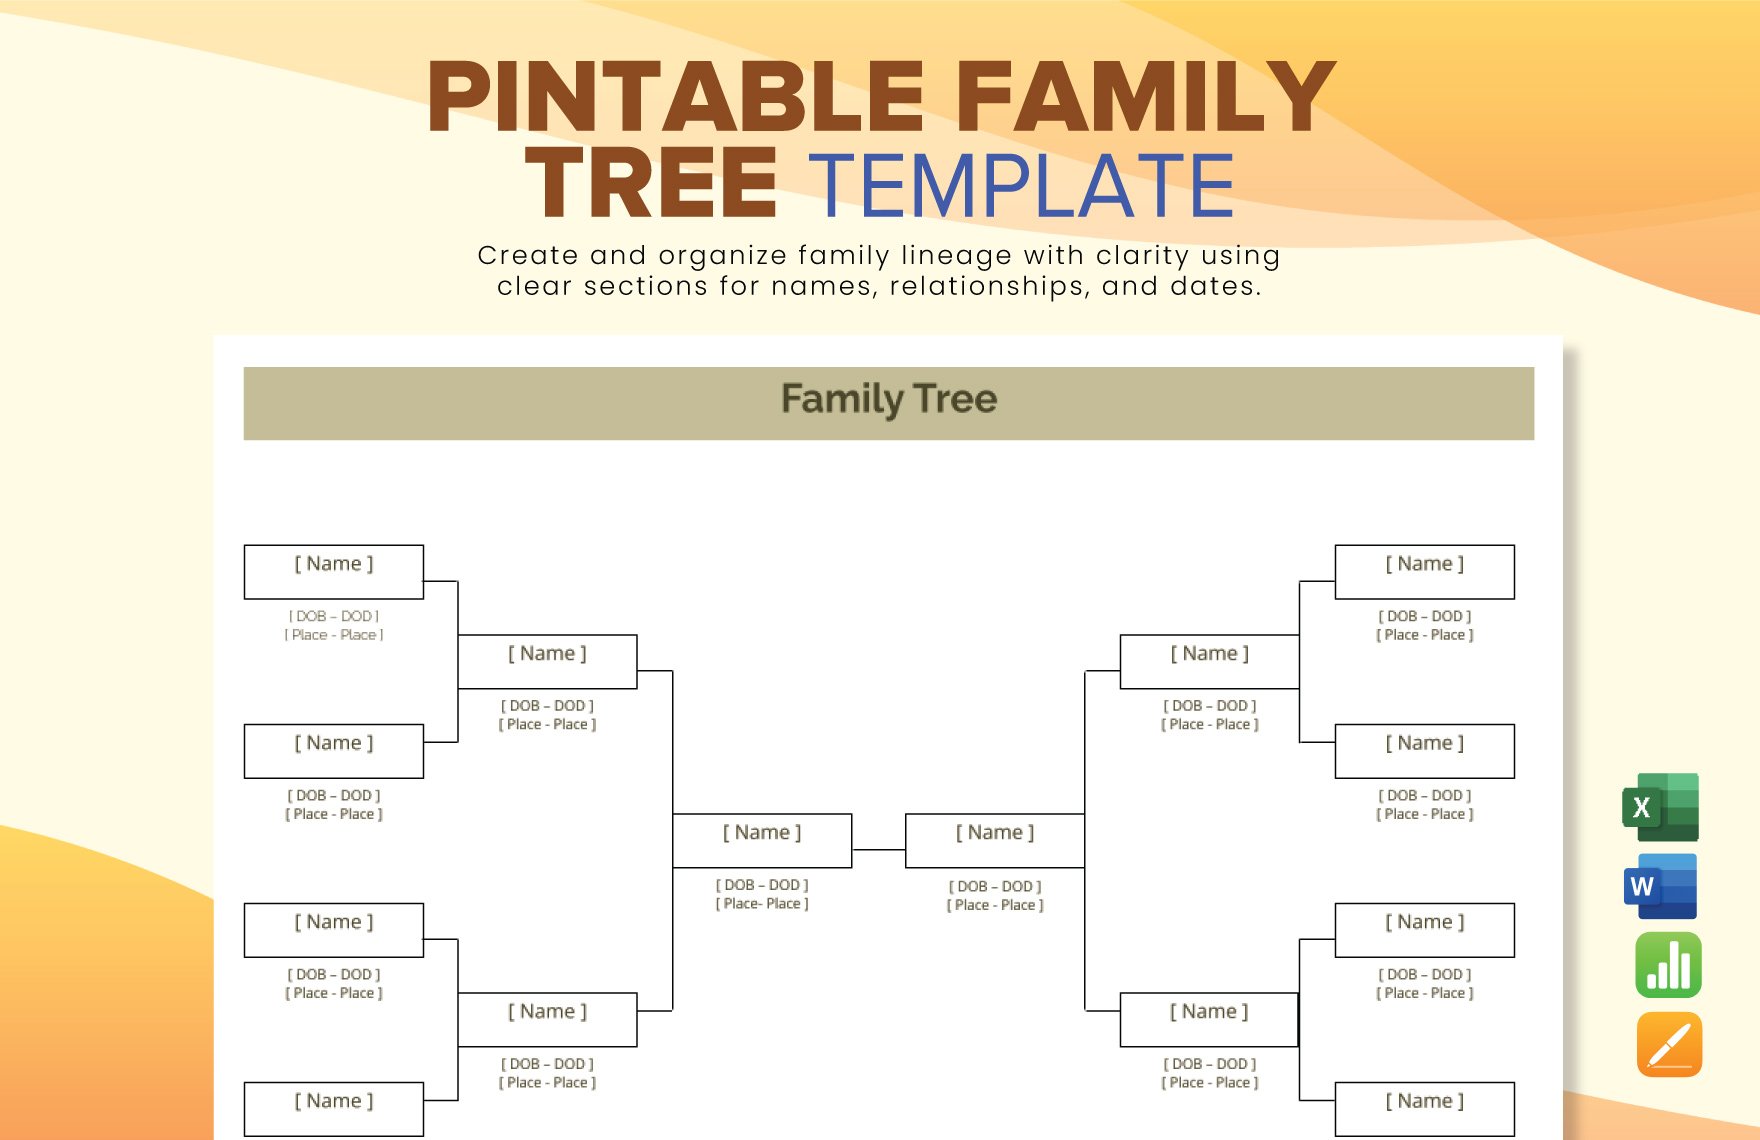 Pintable Family Tree Template in Word, Excel, Apple Pages, Apple Numbers